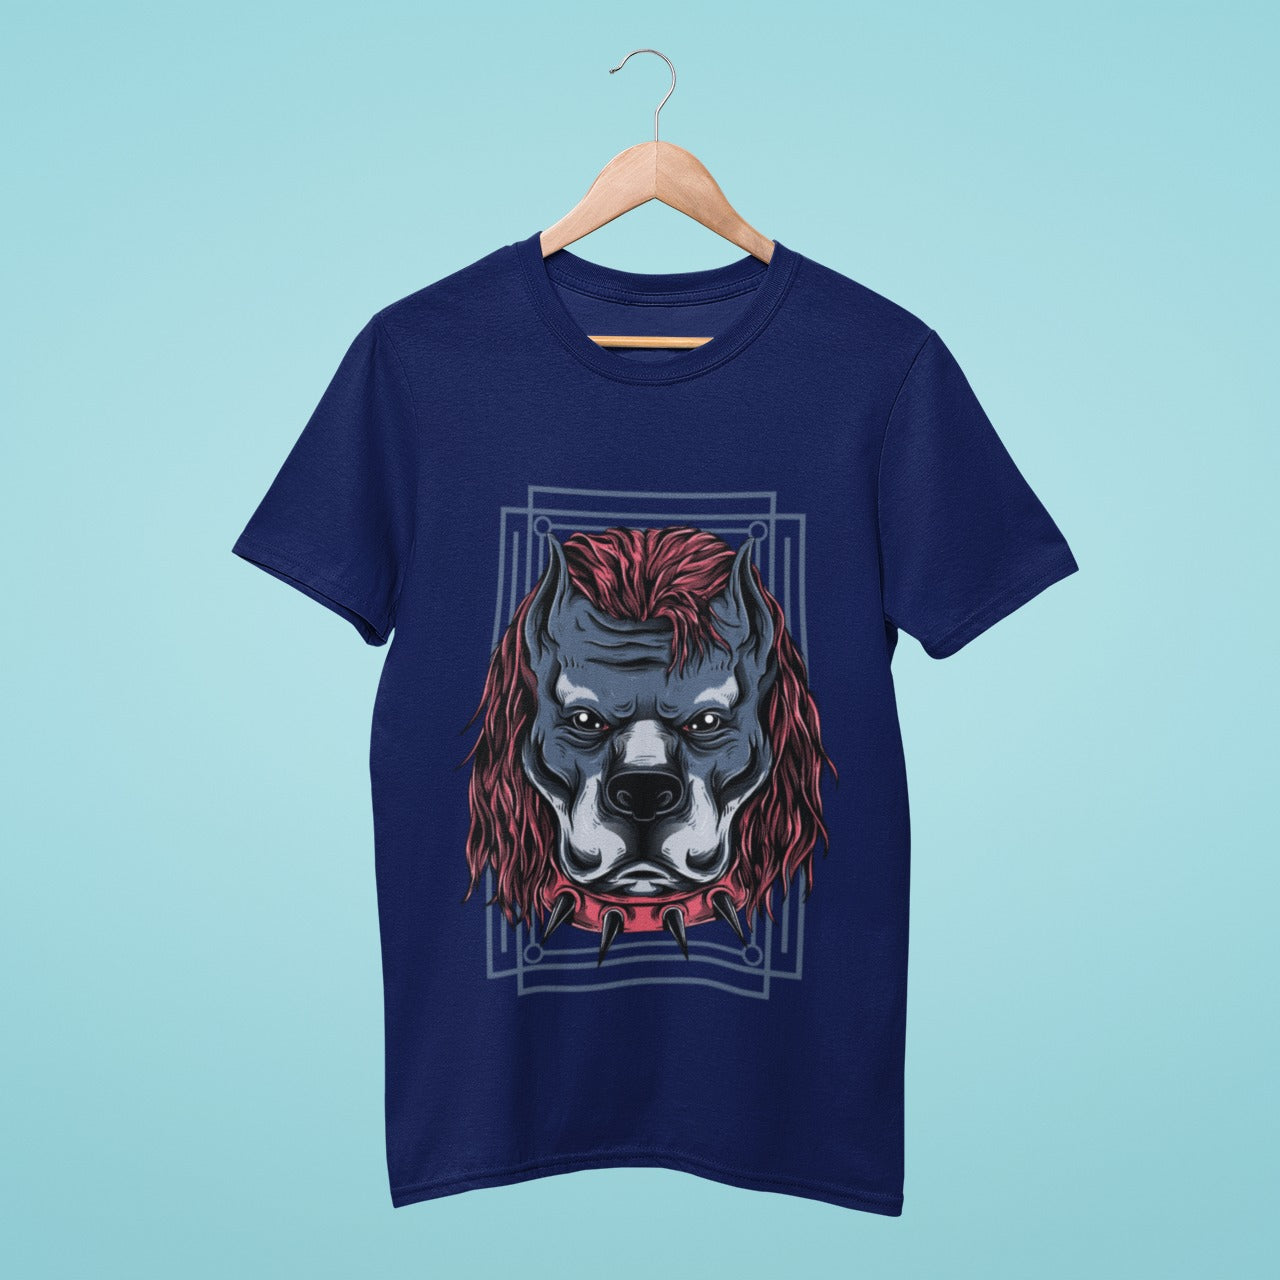 Unleash your wild side with this stylish "Wild Dawg" t-shirt. Featuring a grey-blue bulldog with a bold red-maroon lion-like mane, this tee is perfect for anyone who loves fierce, powerful dogs. Made from soft and comfortable fabric, this t-shirt is perfect for casual wear or for dressing up on a night out. Get yours today and show the world your inner wild dawg!